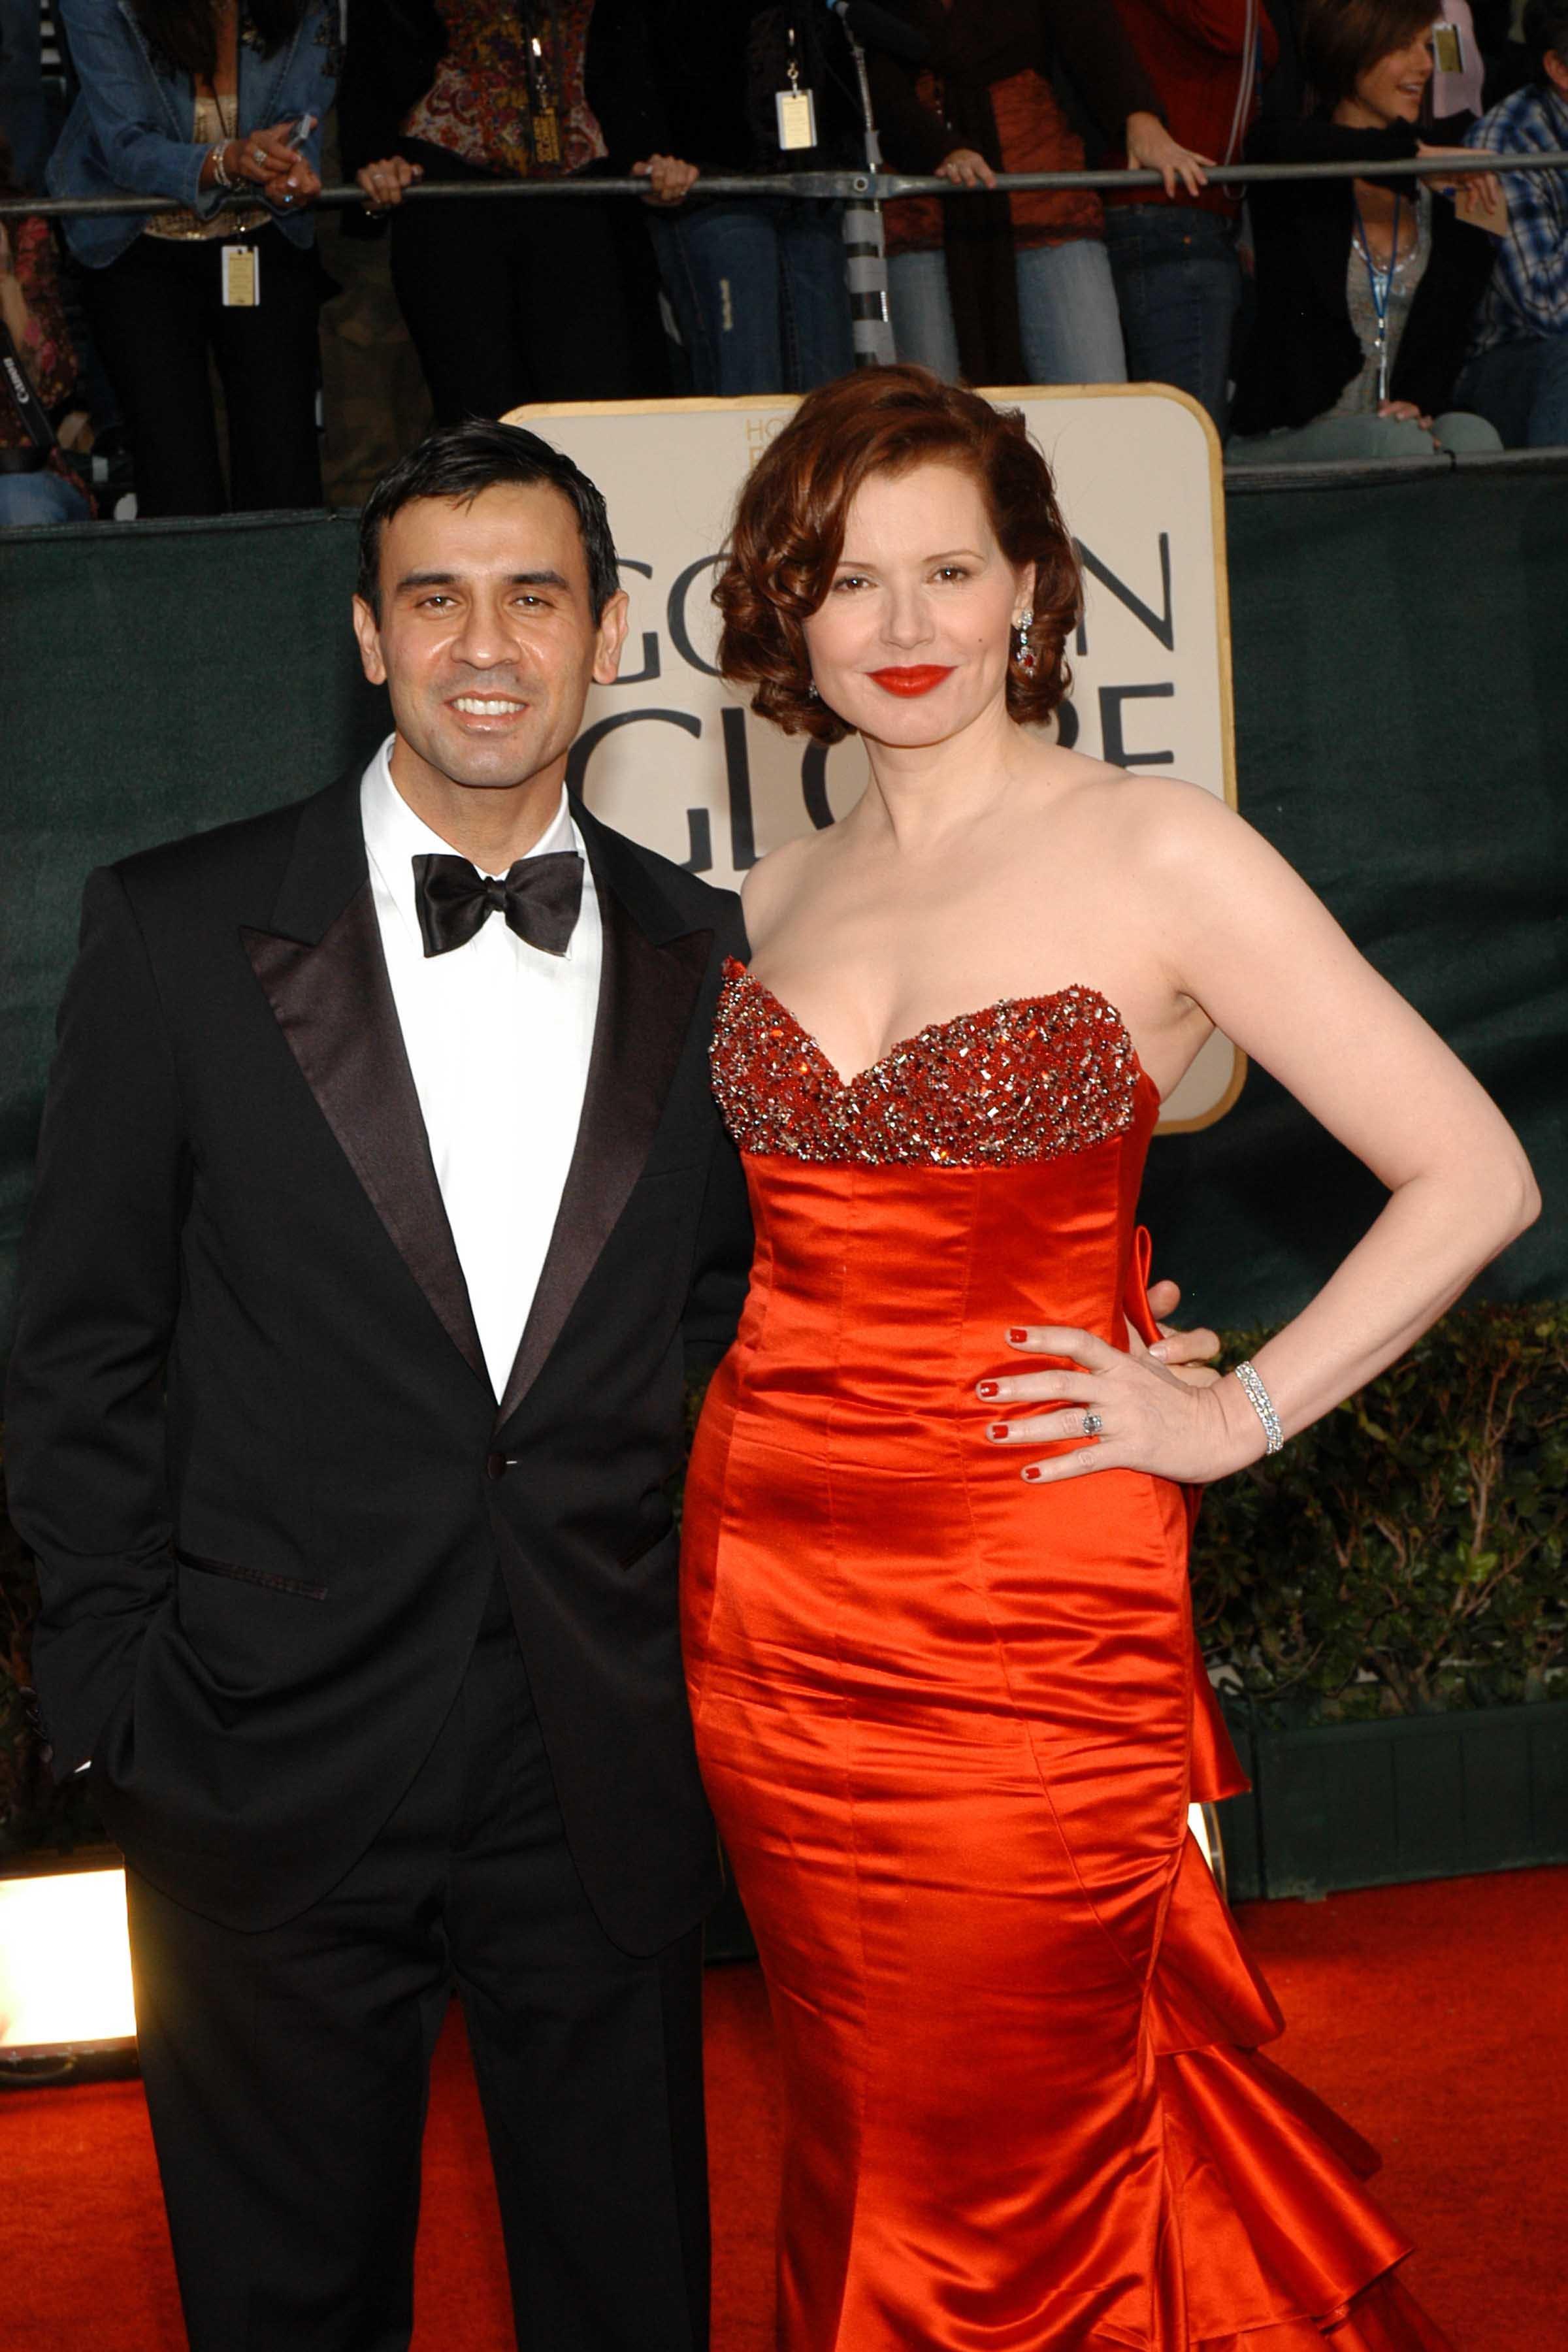 Dr. Reza Jarrahy and Geena Davis at the 63rd Annual Golden Globe Awards - red carpet arrivals at the Beverly Hilton on January 16, 2006 in Beverly Hills, California.  / Source: Getty Images